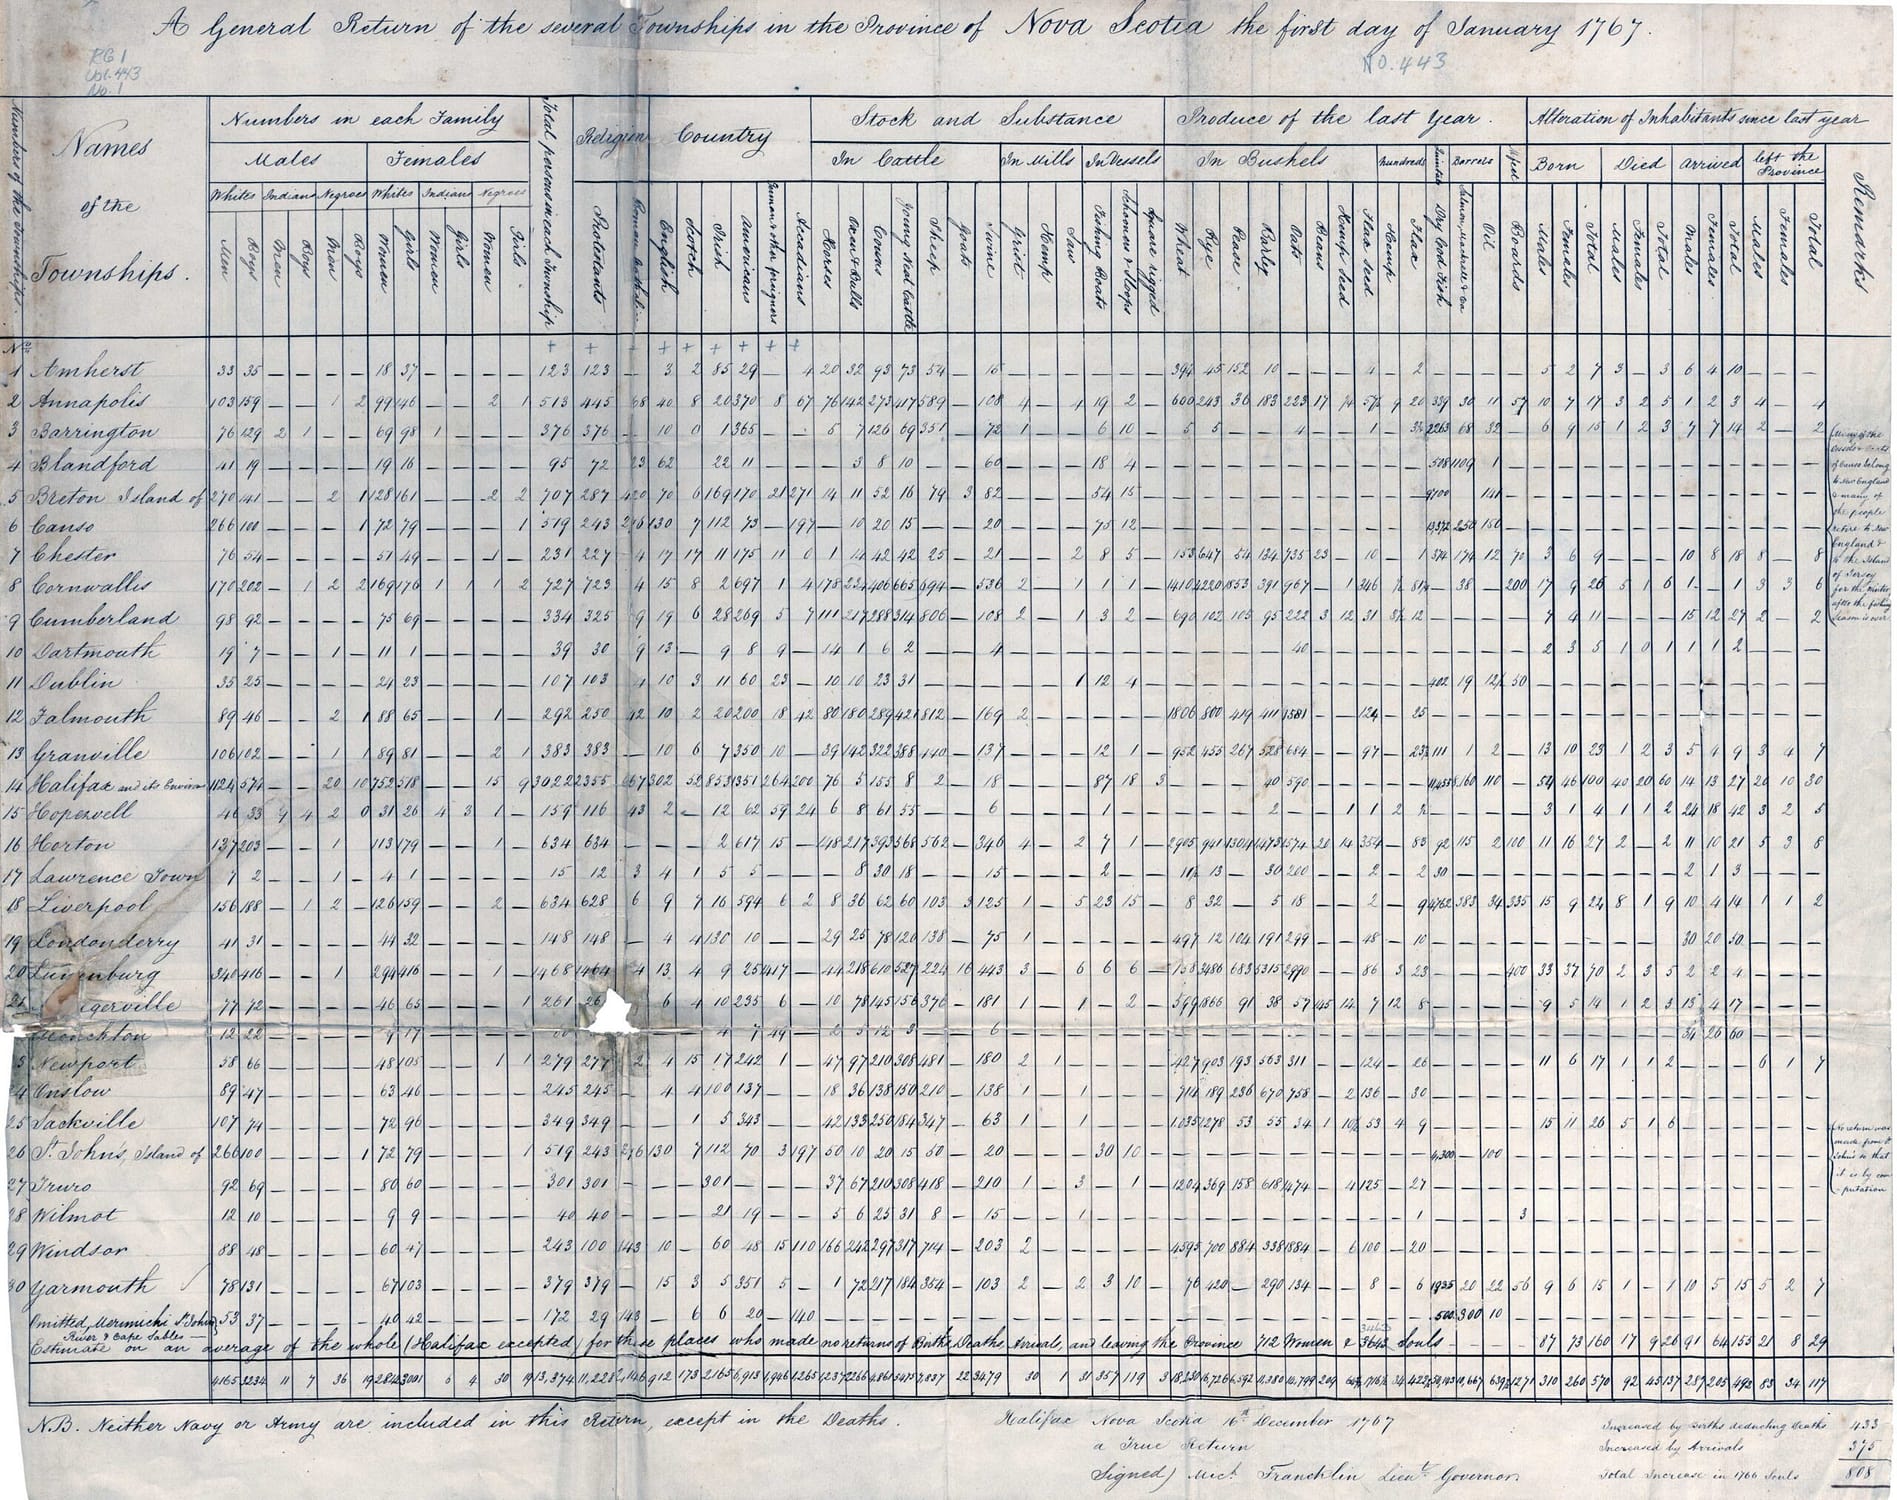 Census, Township of Dartmouth, 1767